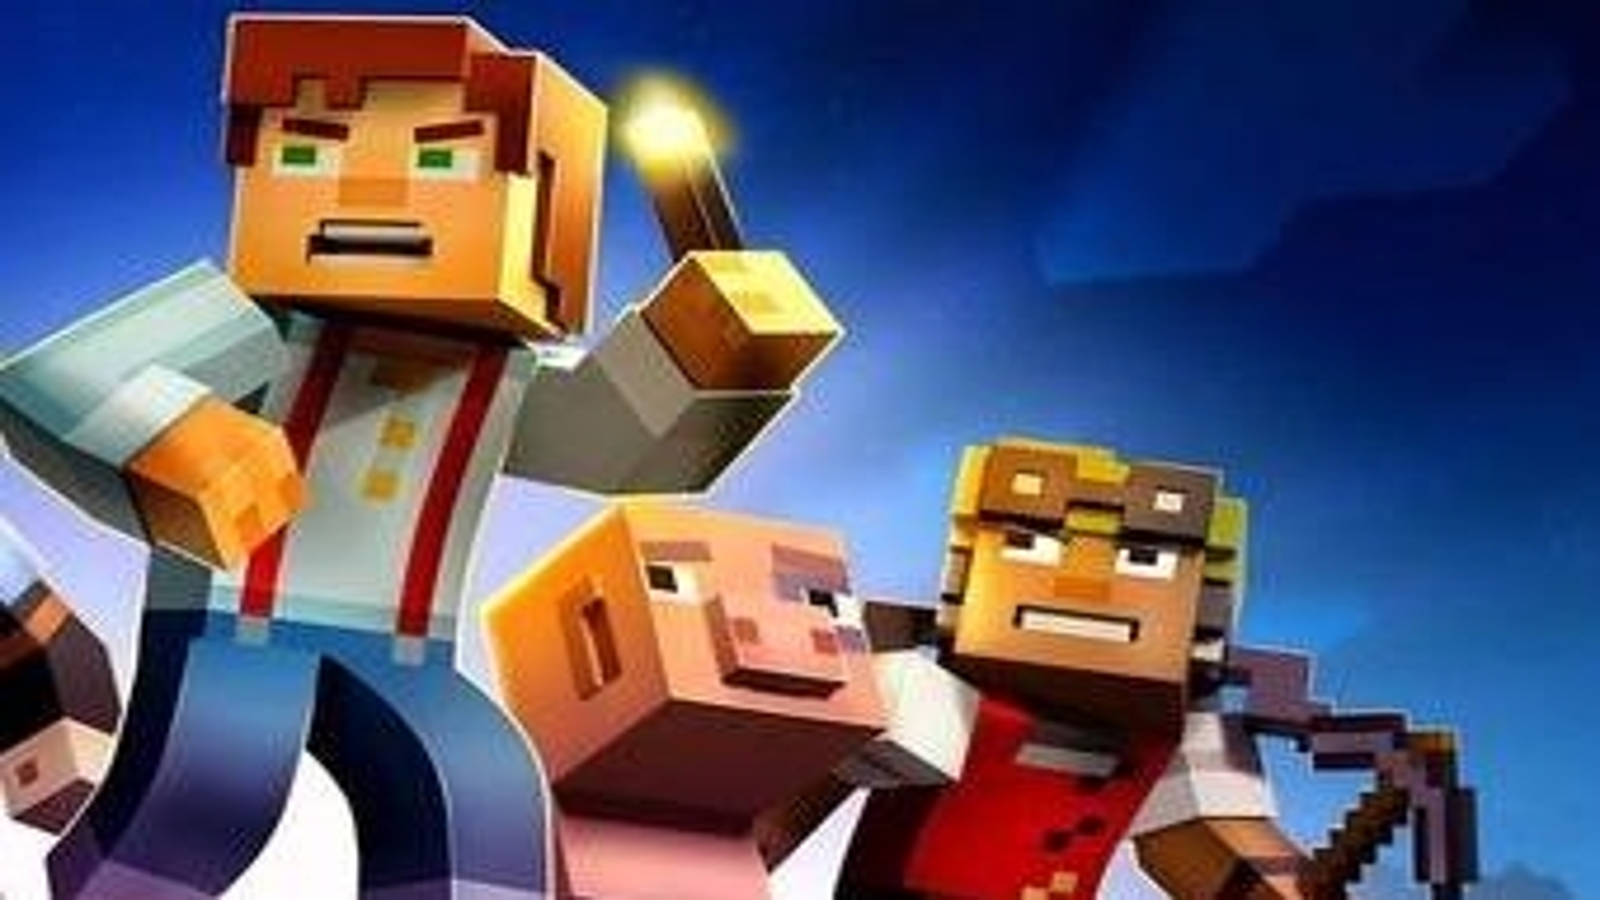 Minecraft: Story Mode is being delisted later this month